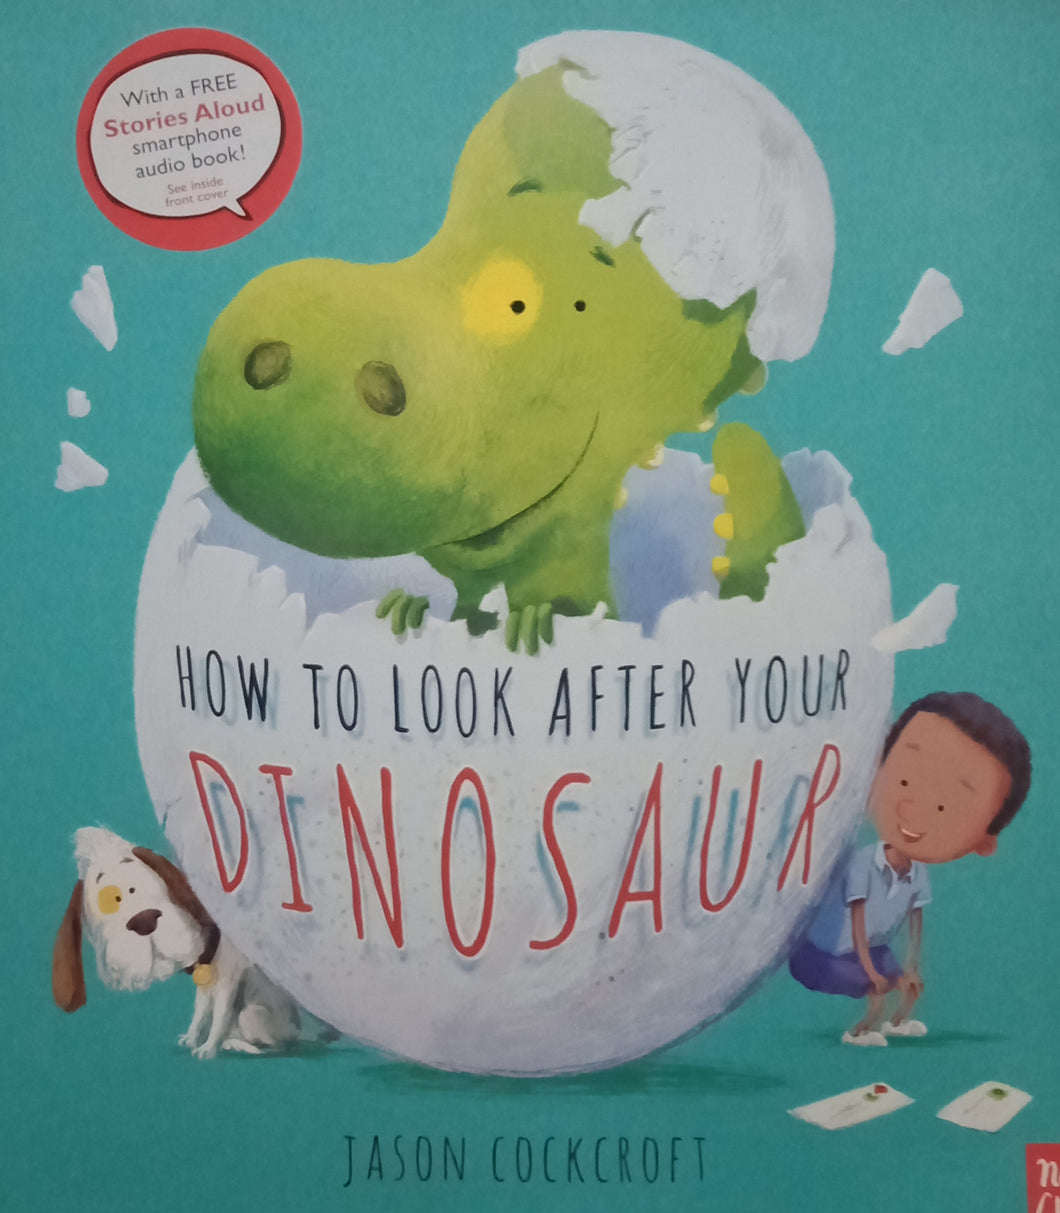 How To Look After Your Dinosaur by Jason Cockcroft